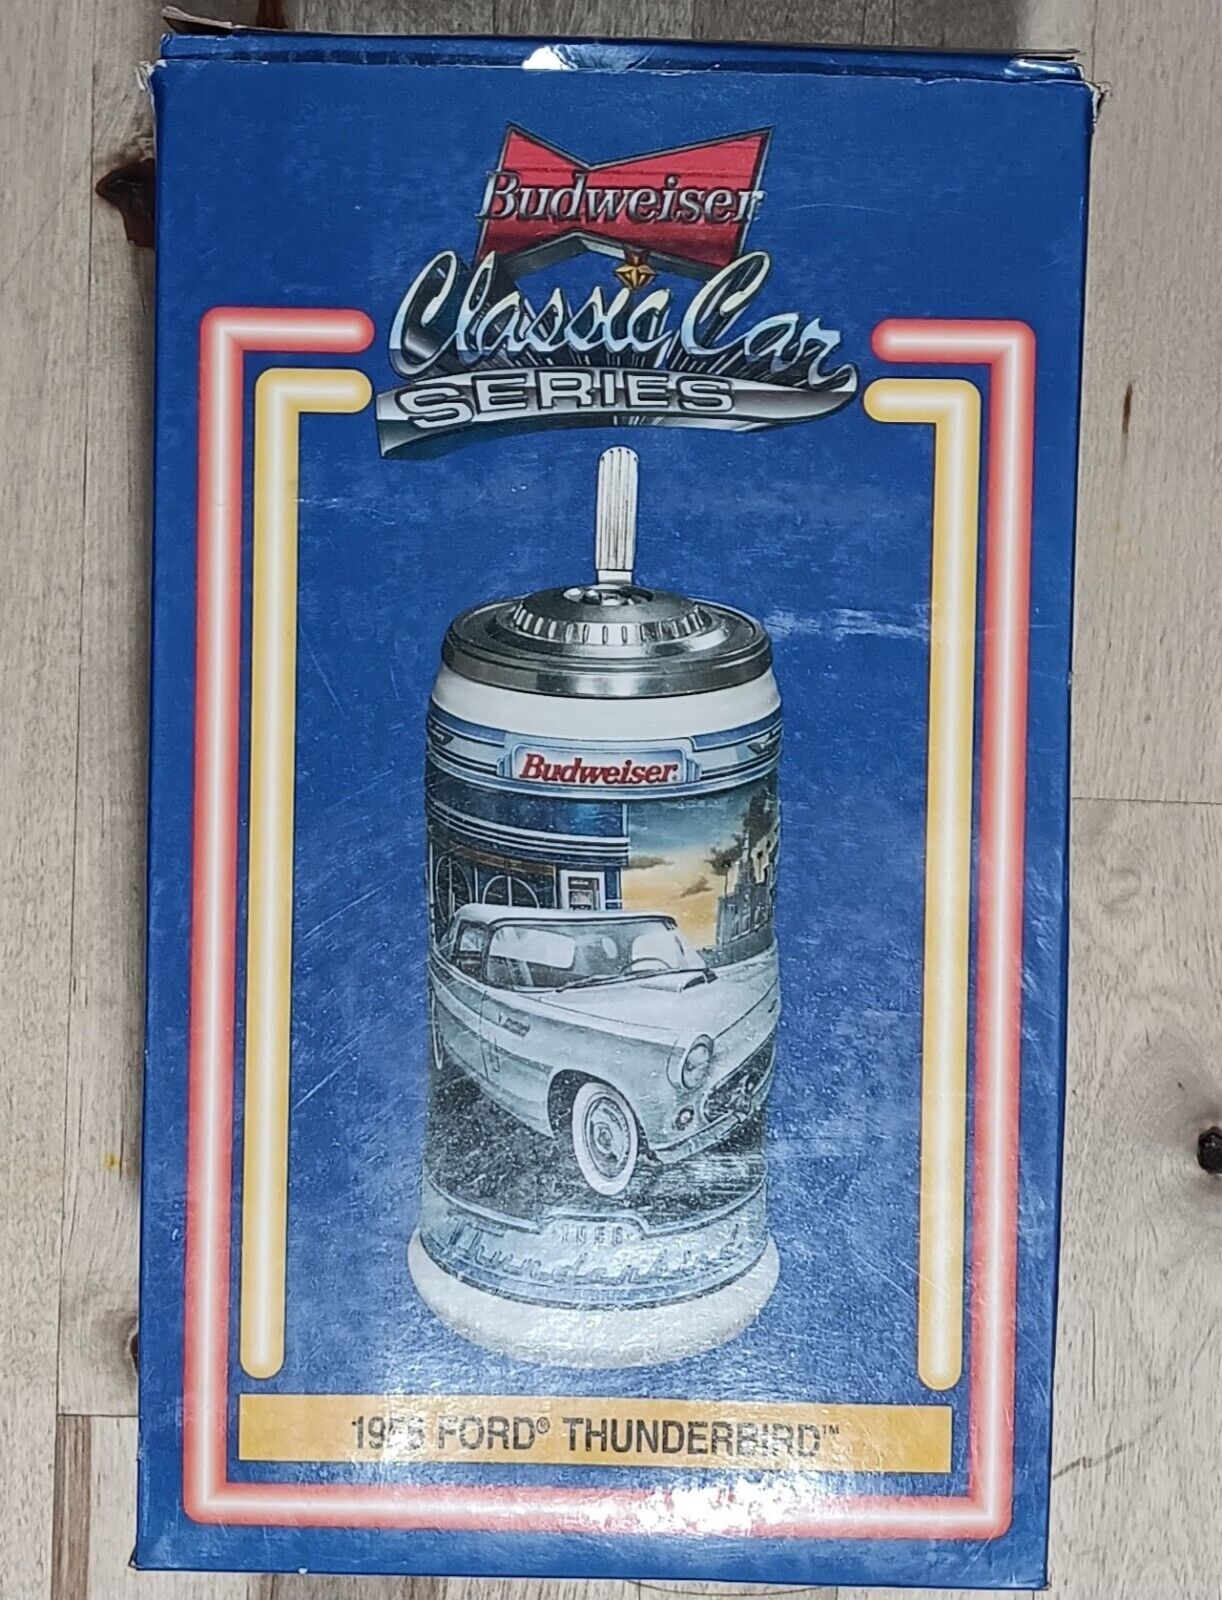 Budweiser Classic Car Series 1956 Ford Thunderbird,  Beer Stein, new - Old stock